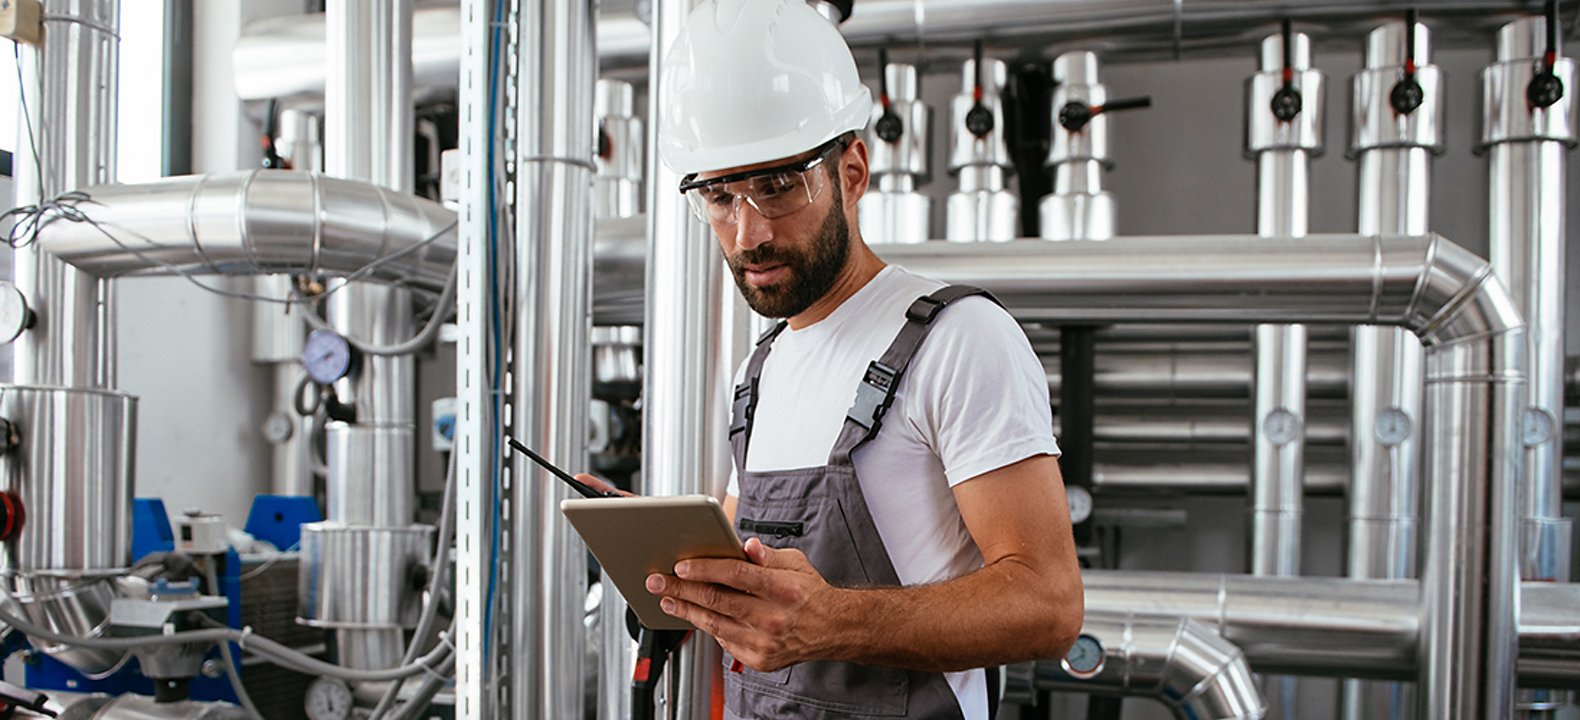 Man in overalls with white hard hat stand in front of pipes looking down at a tablet in his hands